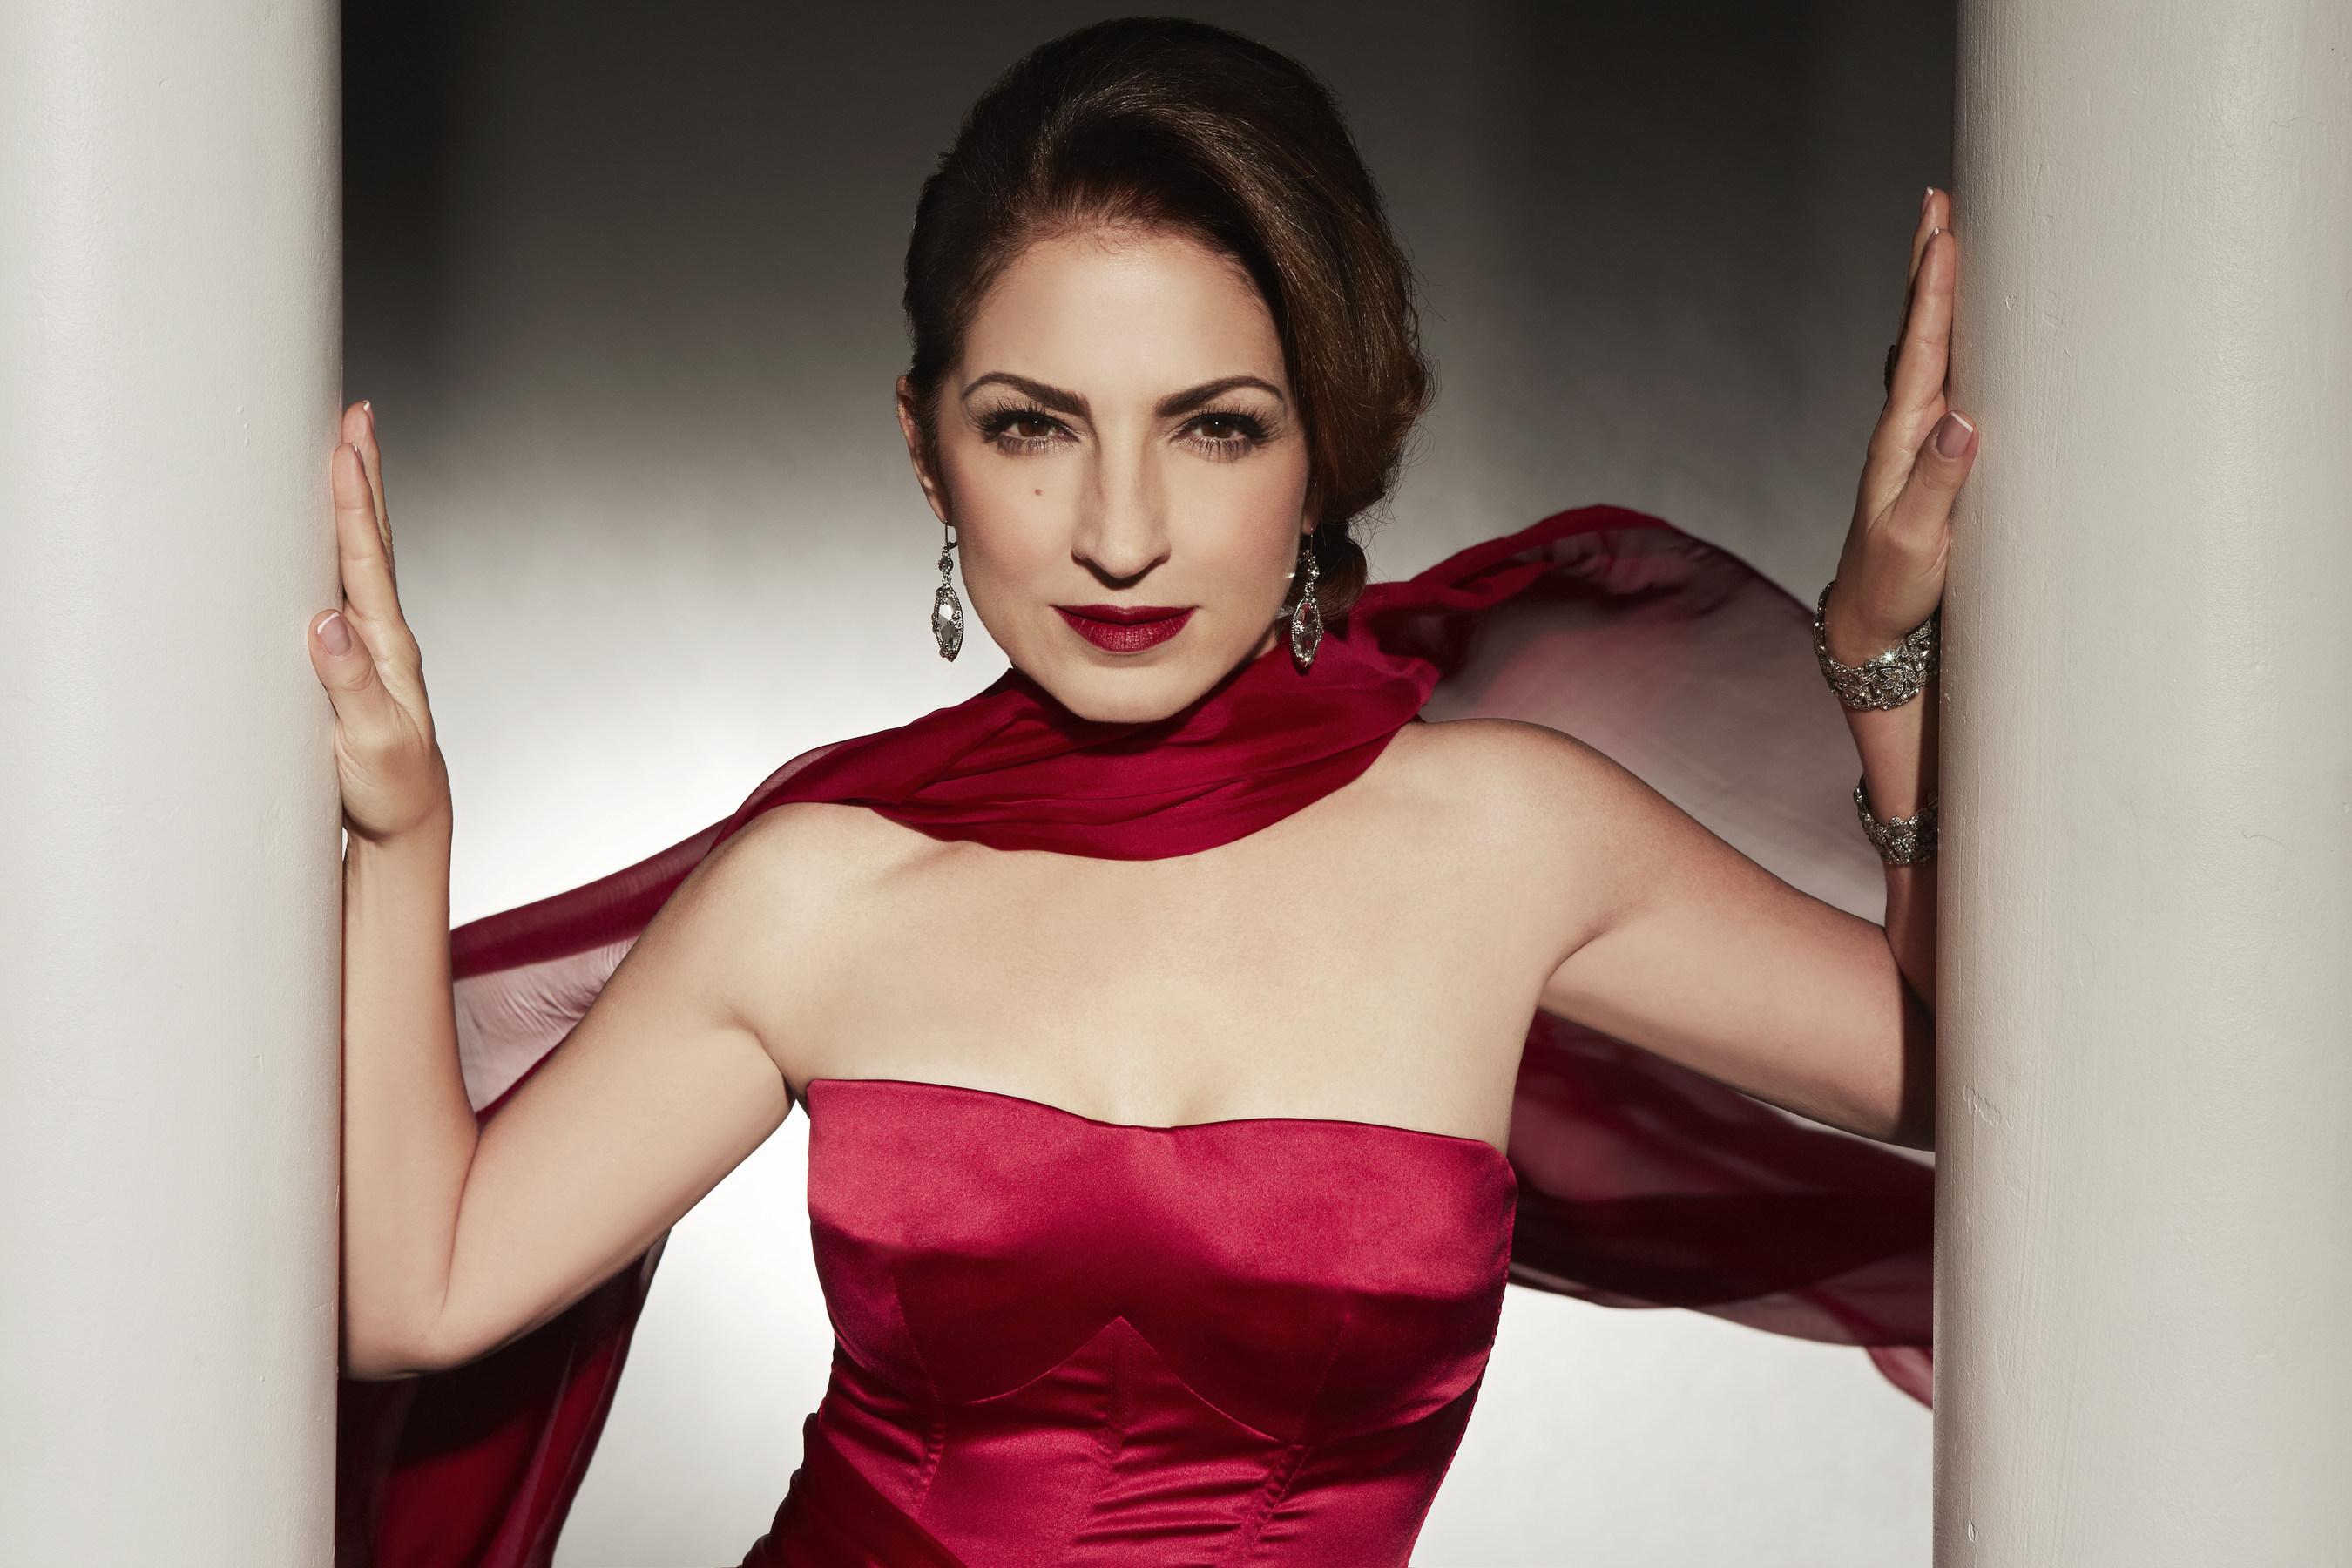 Seven-time Grammy Award-winner and international superstar Gloria Estefanwill perform on PBS' NATIONAL MEMORIAL DAY CONCERT broadcast live from theWest Lawn of the U.S. Capitol on Sunday, May 24, 2015 from 8:00 to 9:30 p.m.ET.